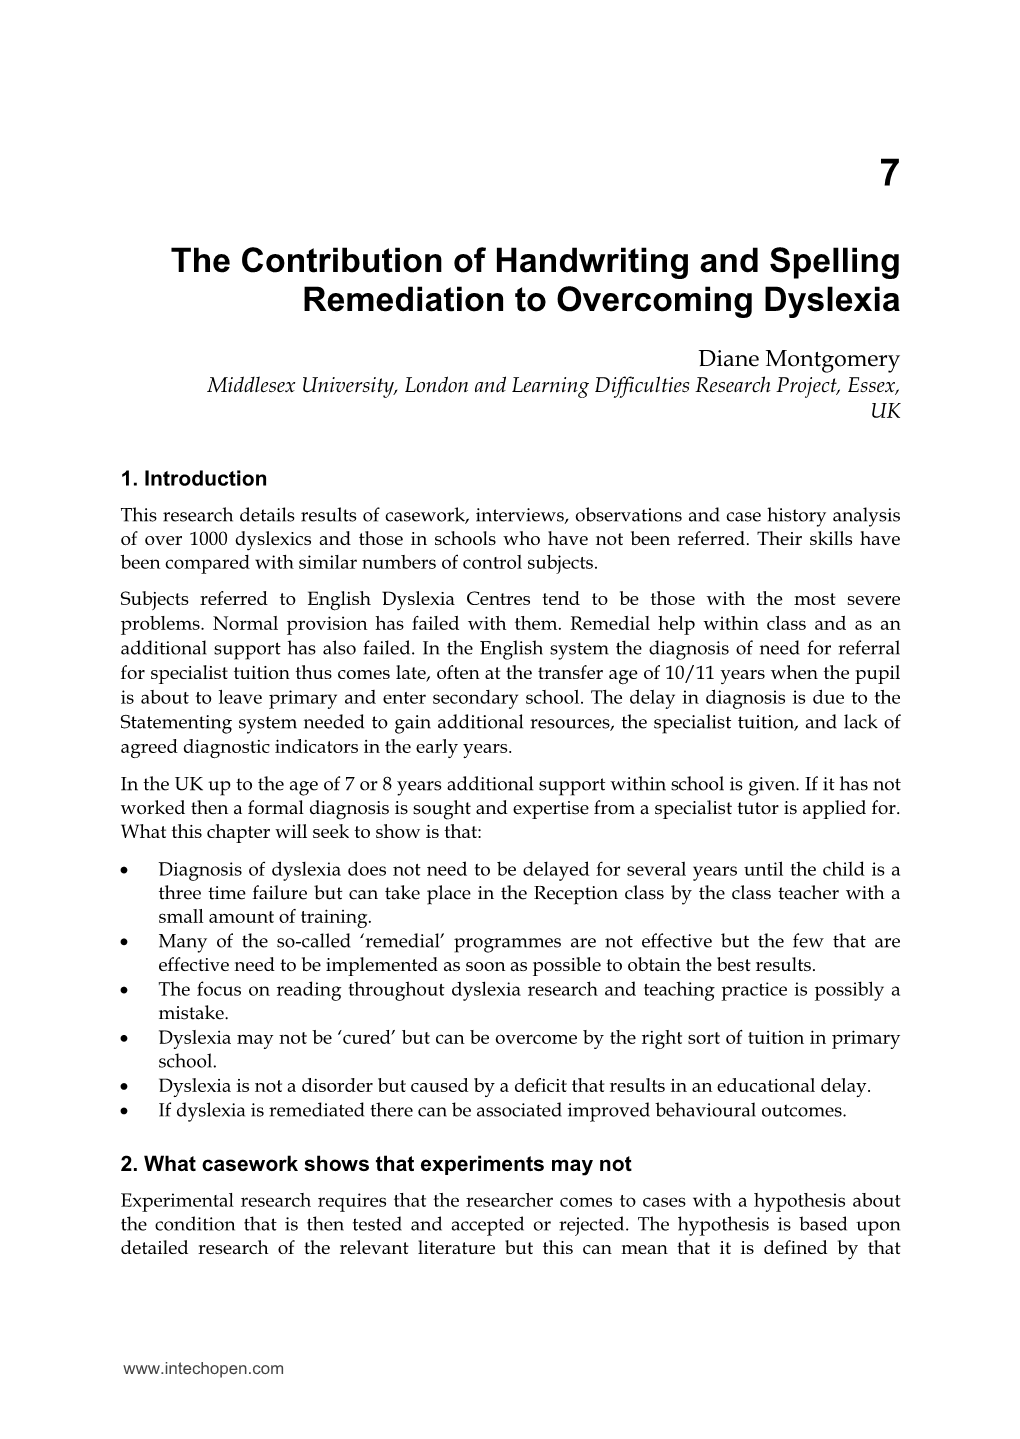 The Contribution of Handwriting and Spelling Remediation to Overcoming Dyslexia